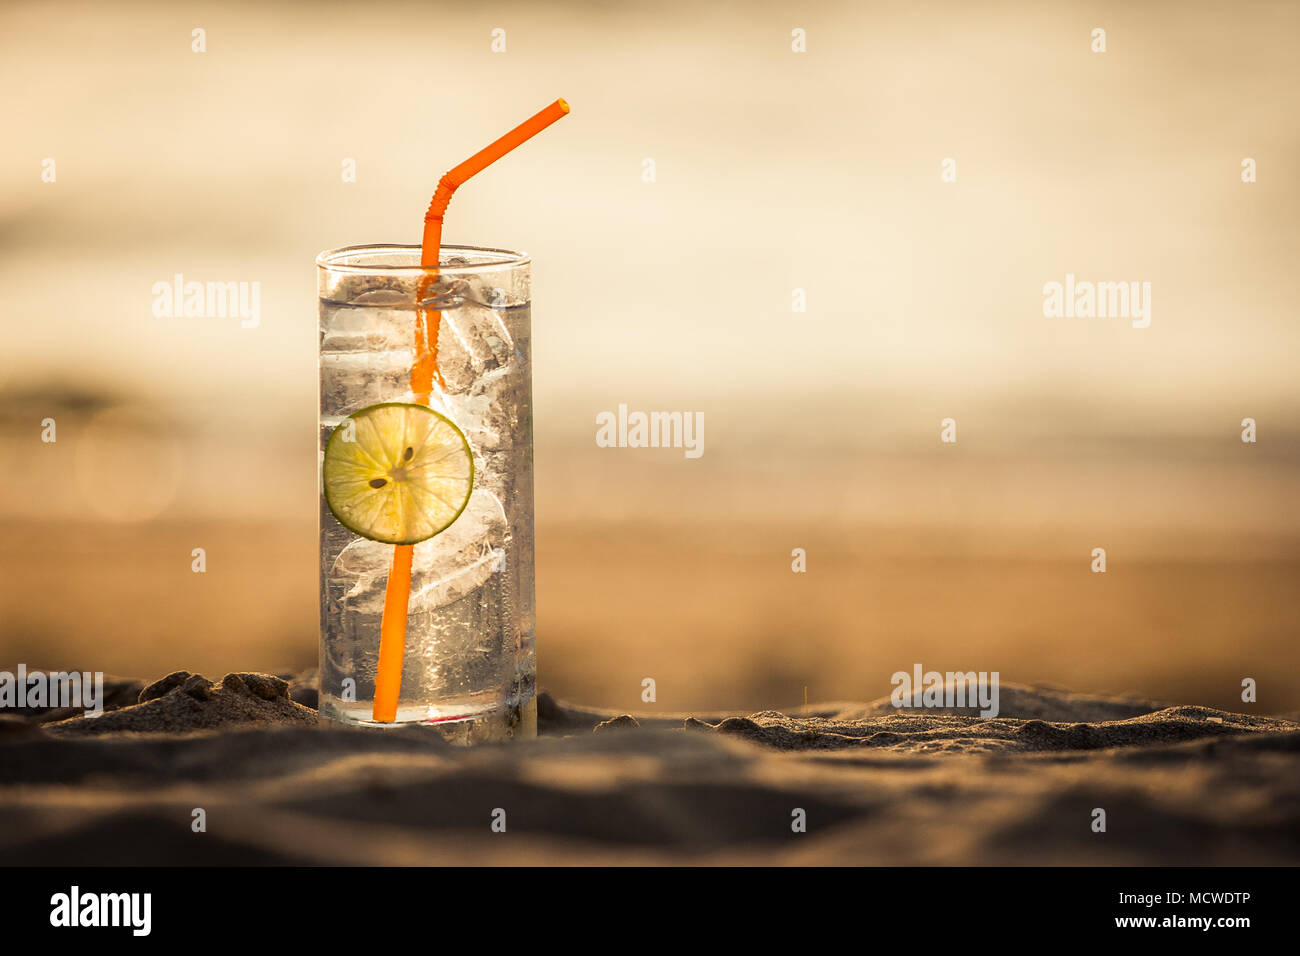 Picture of a glass of Gin Tonic with straw and lime slice on the beach, at sunset. Long Beach, Ko Lanta, Thailand. Stock Photo